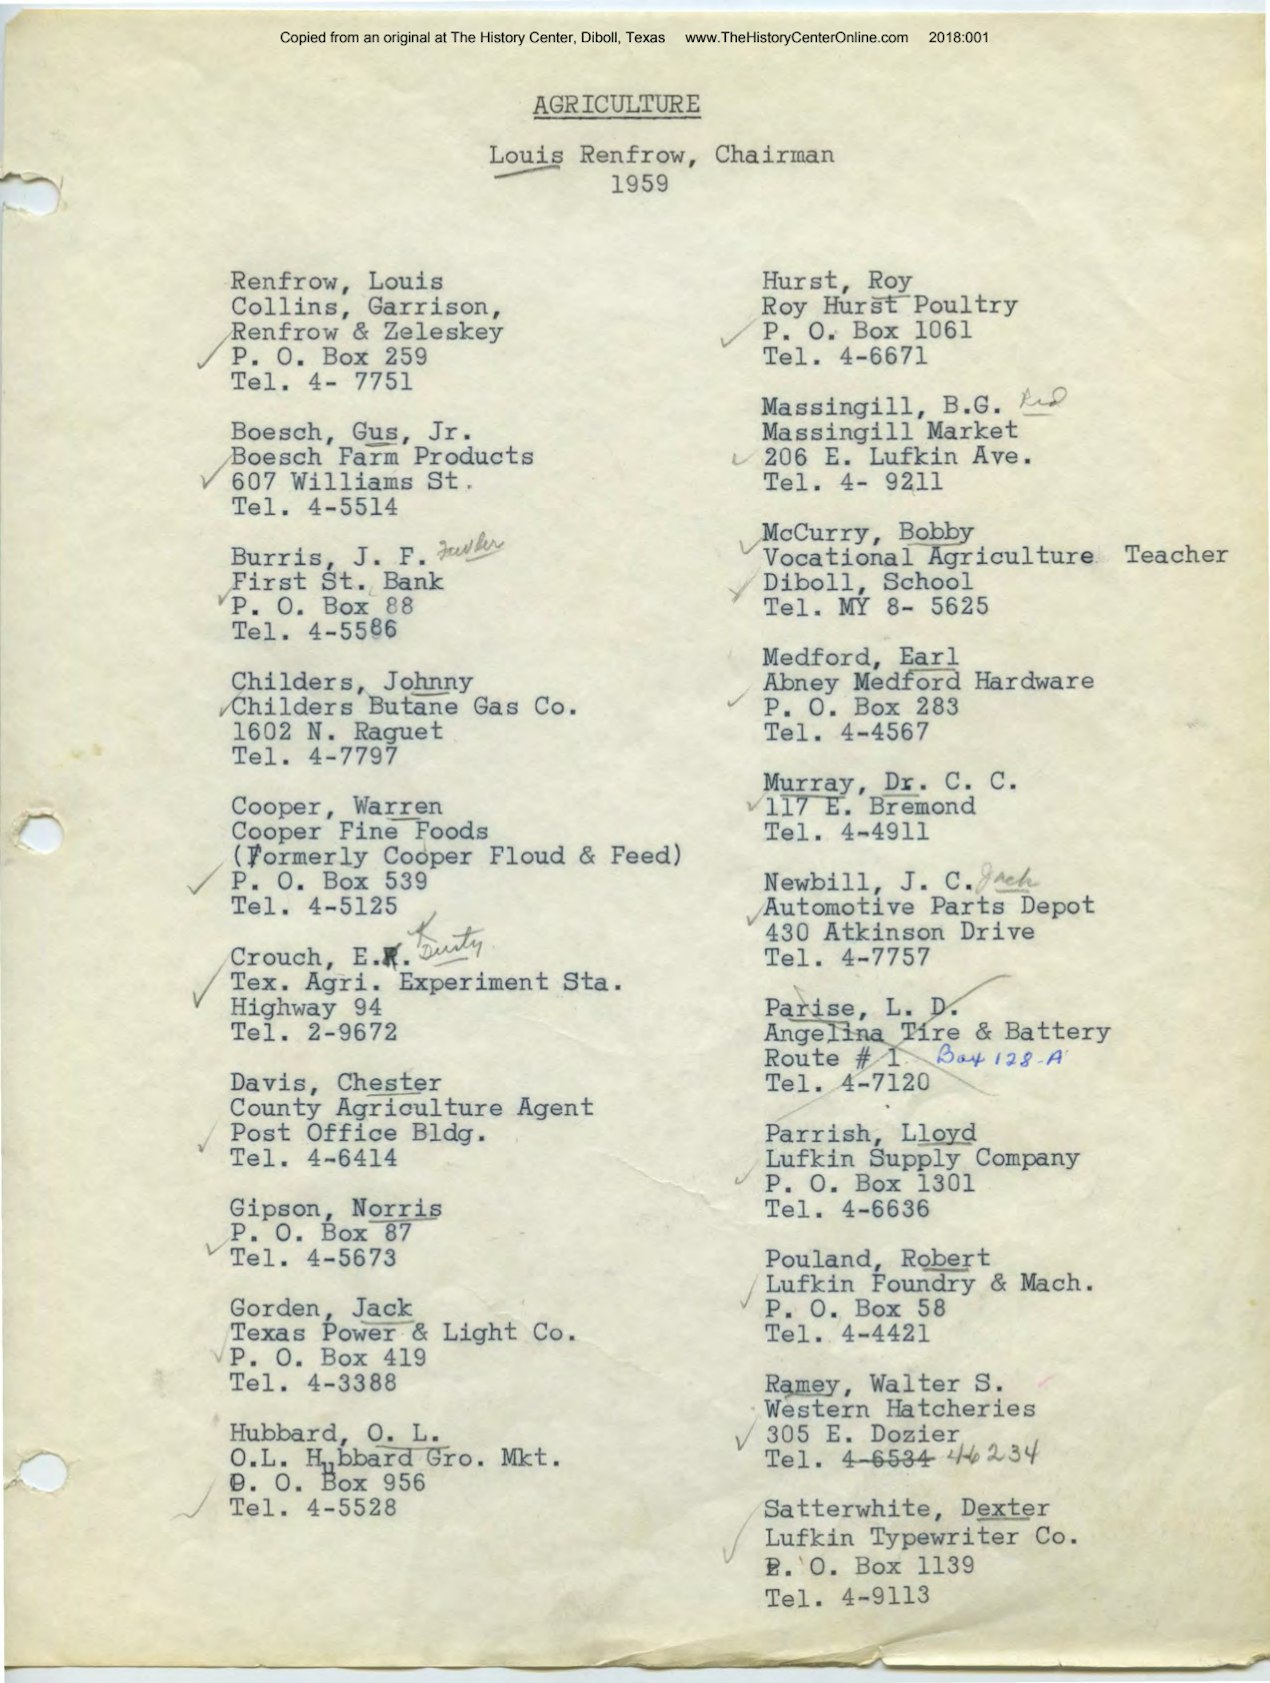 1959-1962 ACCM Committee Minutes